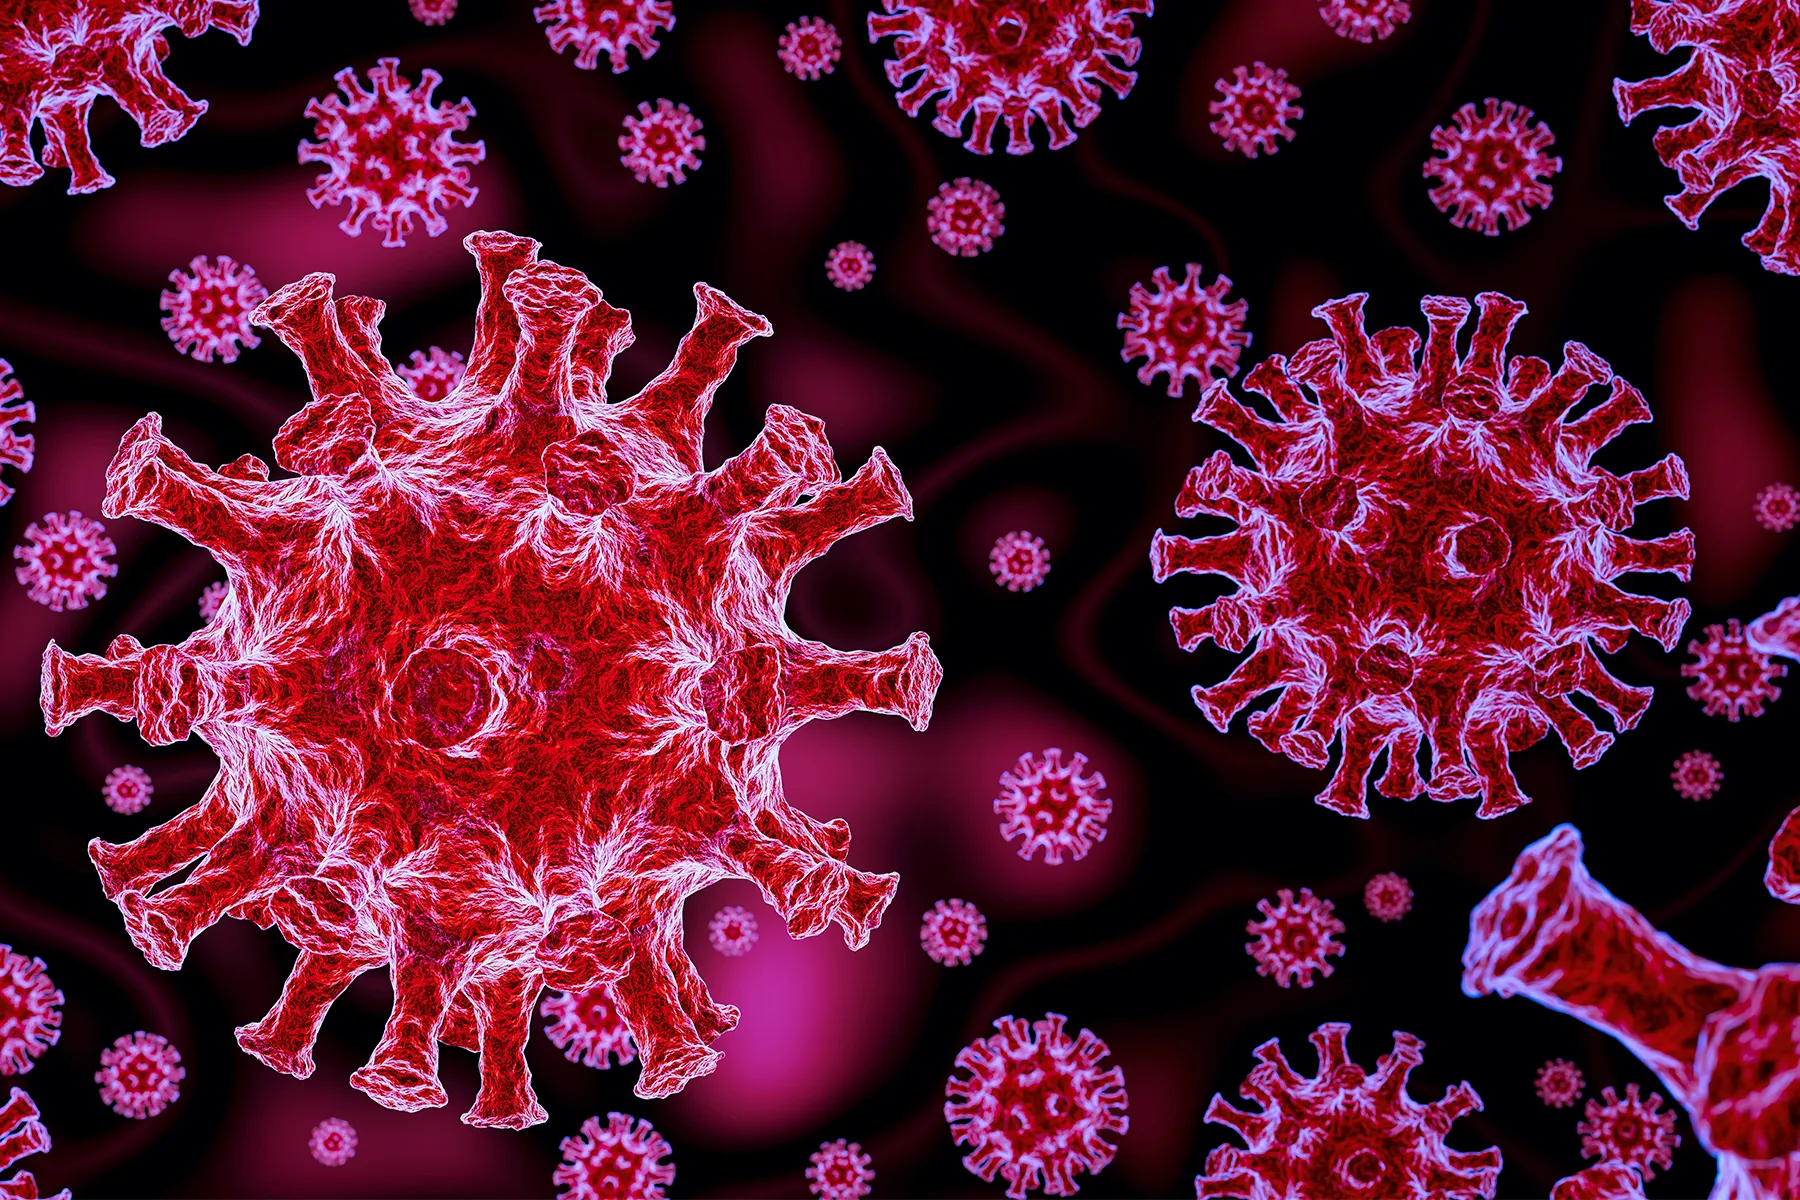 COVID-19 Virus Found in Stool May Be Infectious